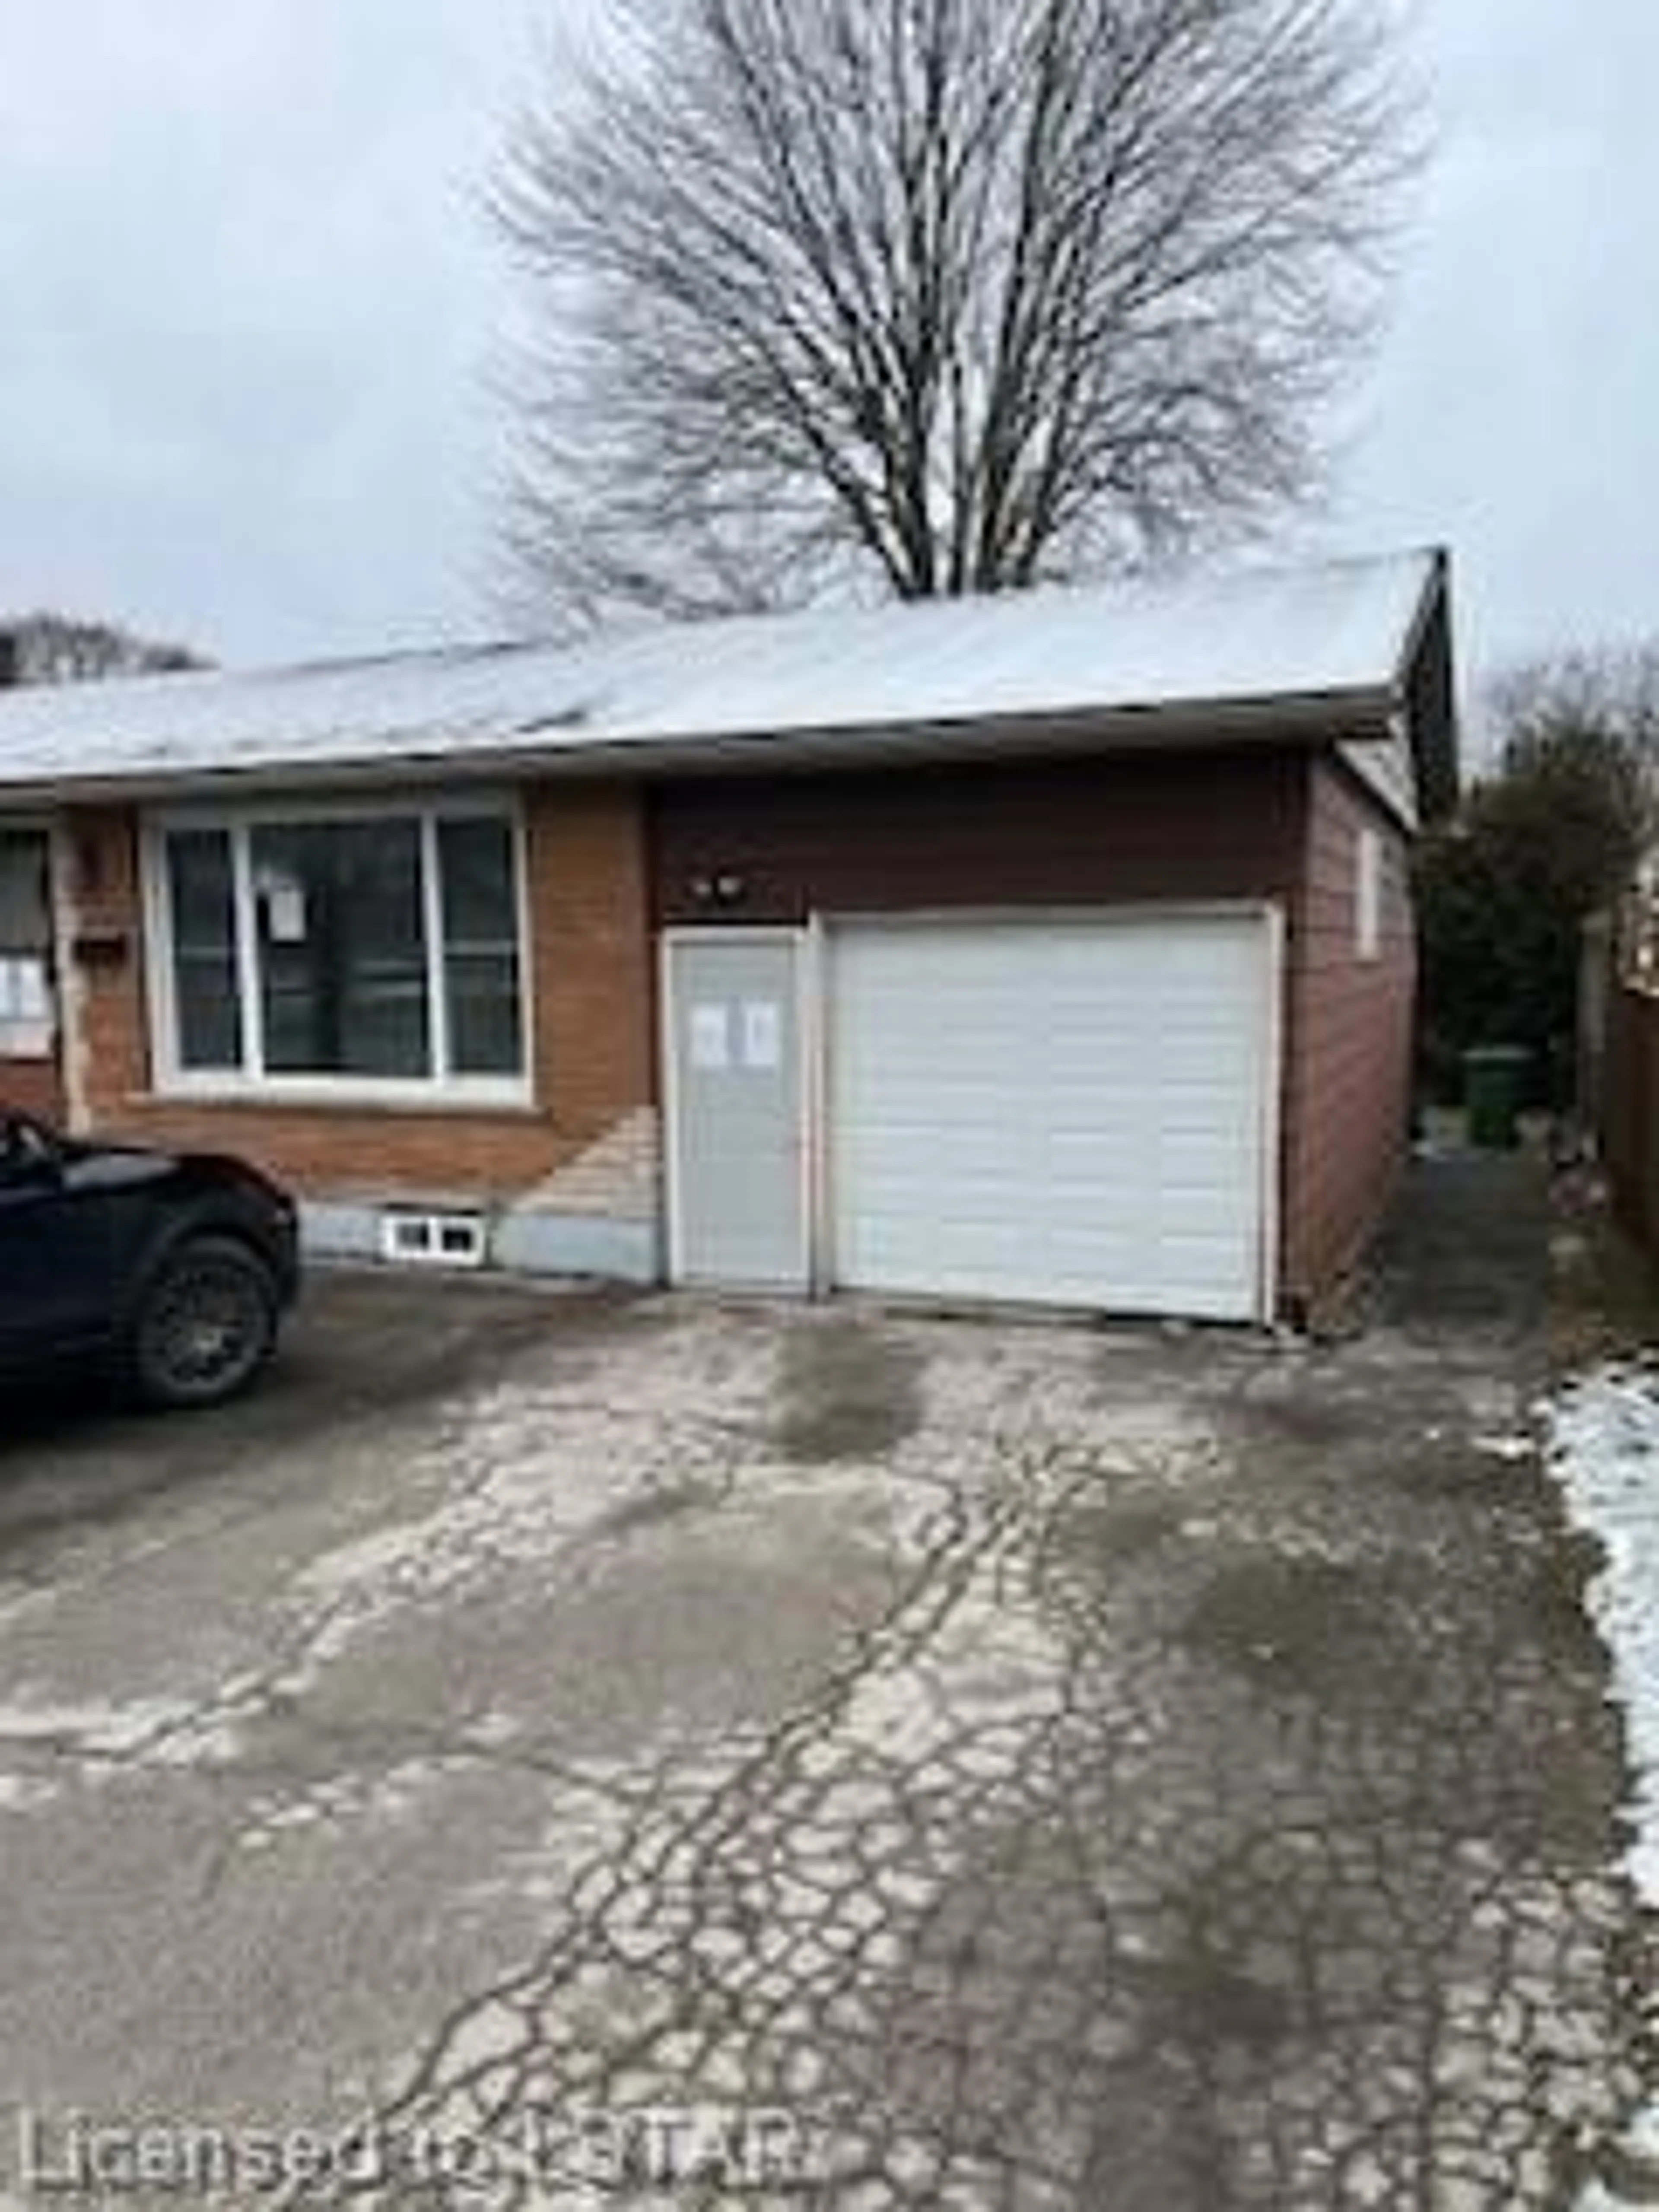 Home with unknown exterior material for 76 1/2 Fairview Ave, St. Thomas Ontario N5R 4X6